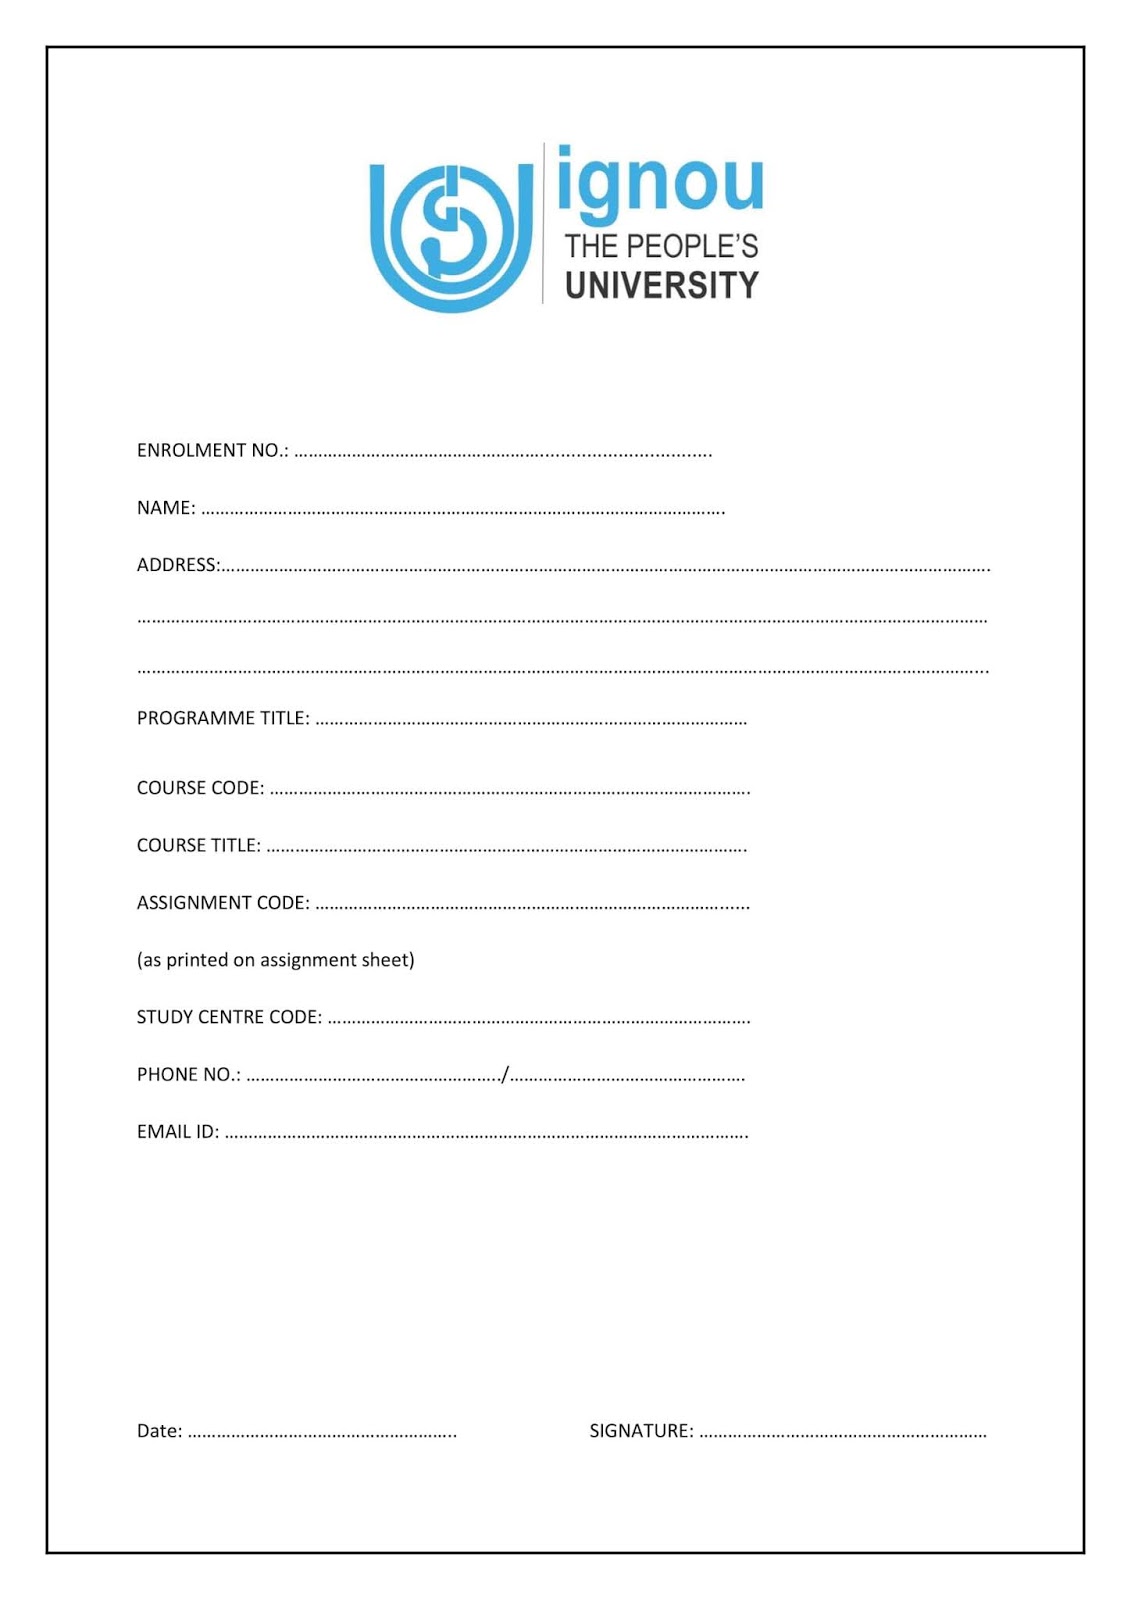 ignou assignment cover page pdf download